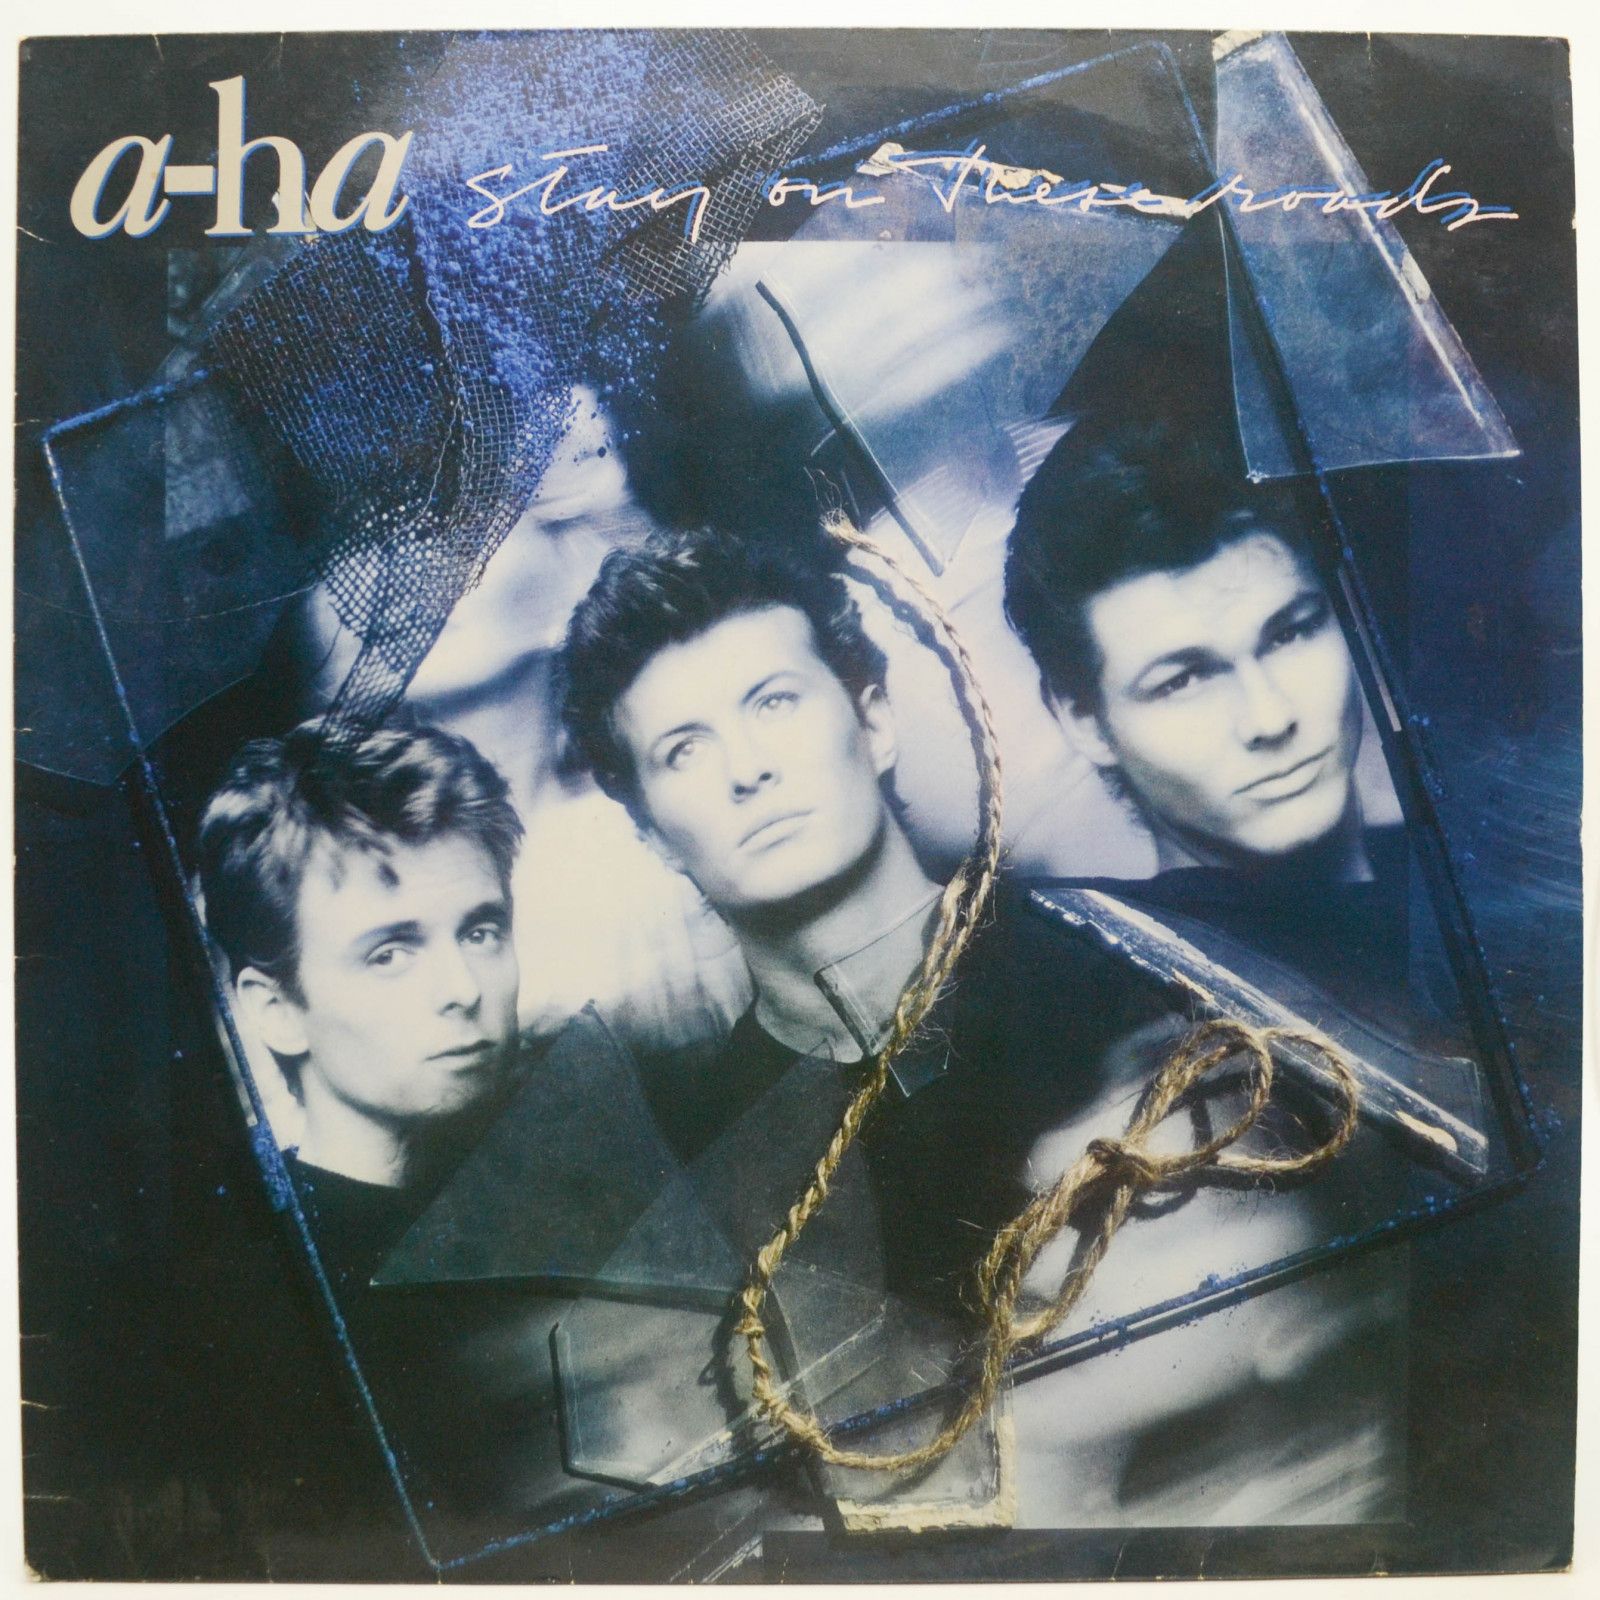 a-ha — Stay On These Roads, 1988